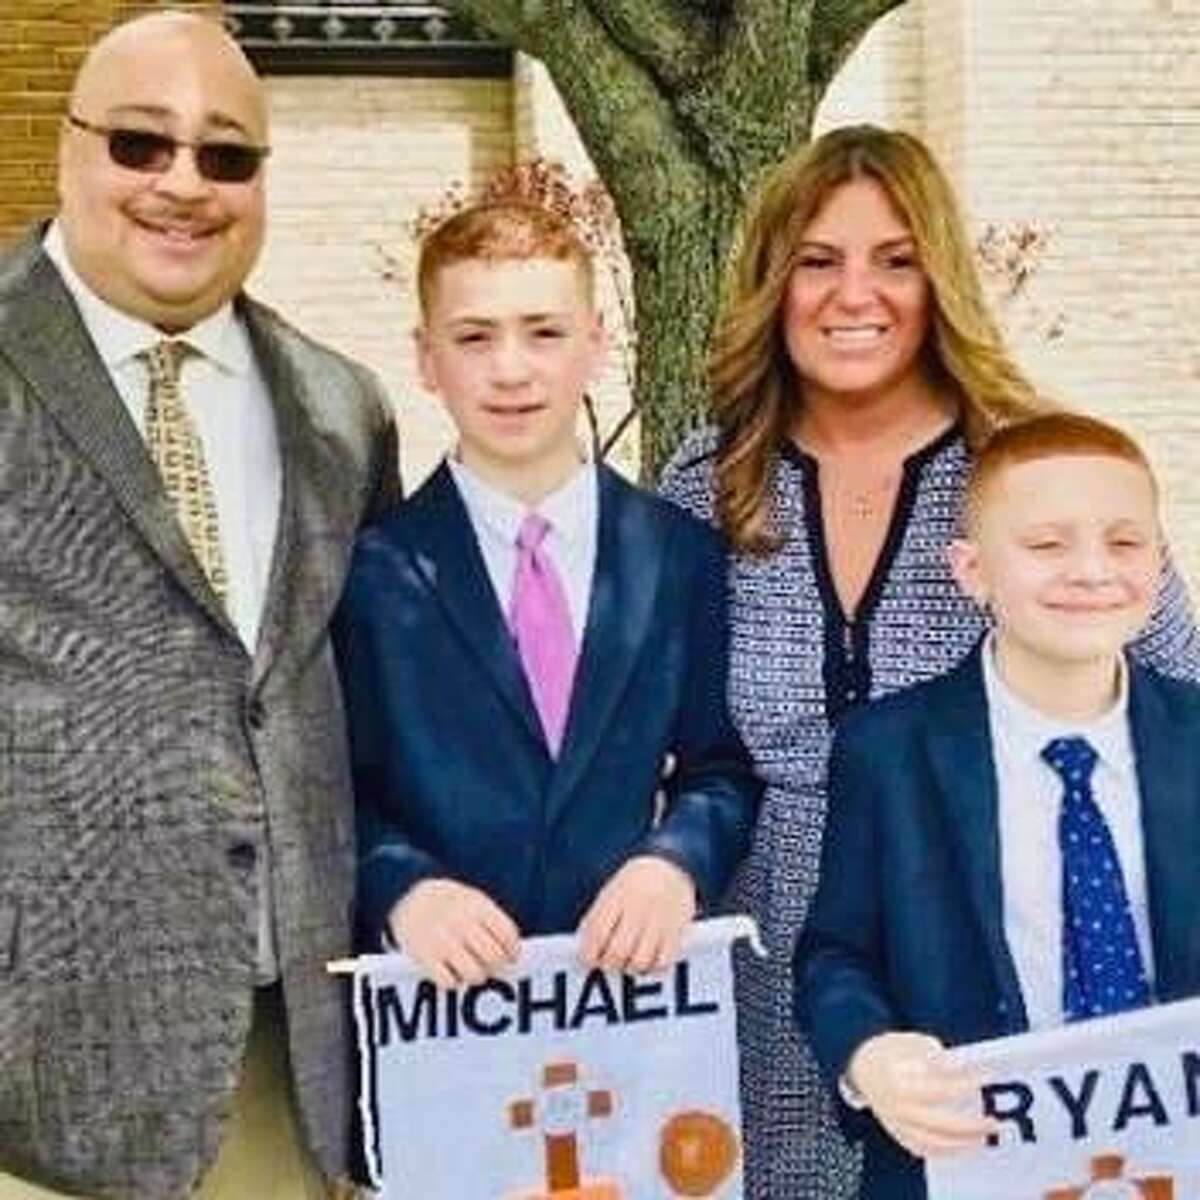 Officer Philip Roselle, who lives in Norwalk, Conn., with his wife and their two sons, ages 9 and 14, was shot in the arm during target practice on Sept. 5, 2017, at the firing range at Norwalk police headquarters. Roselle was rushed to the hospital after the shooting.